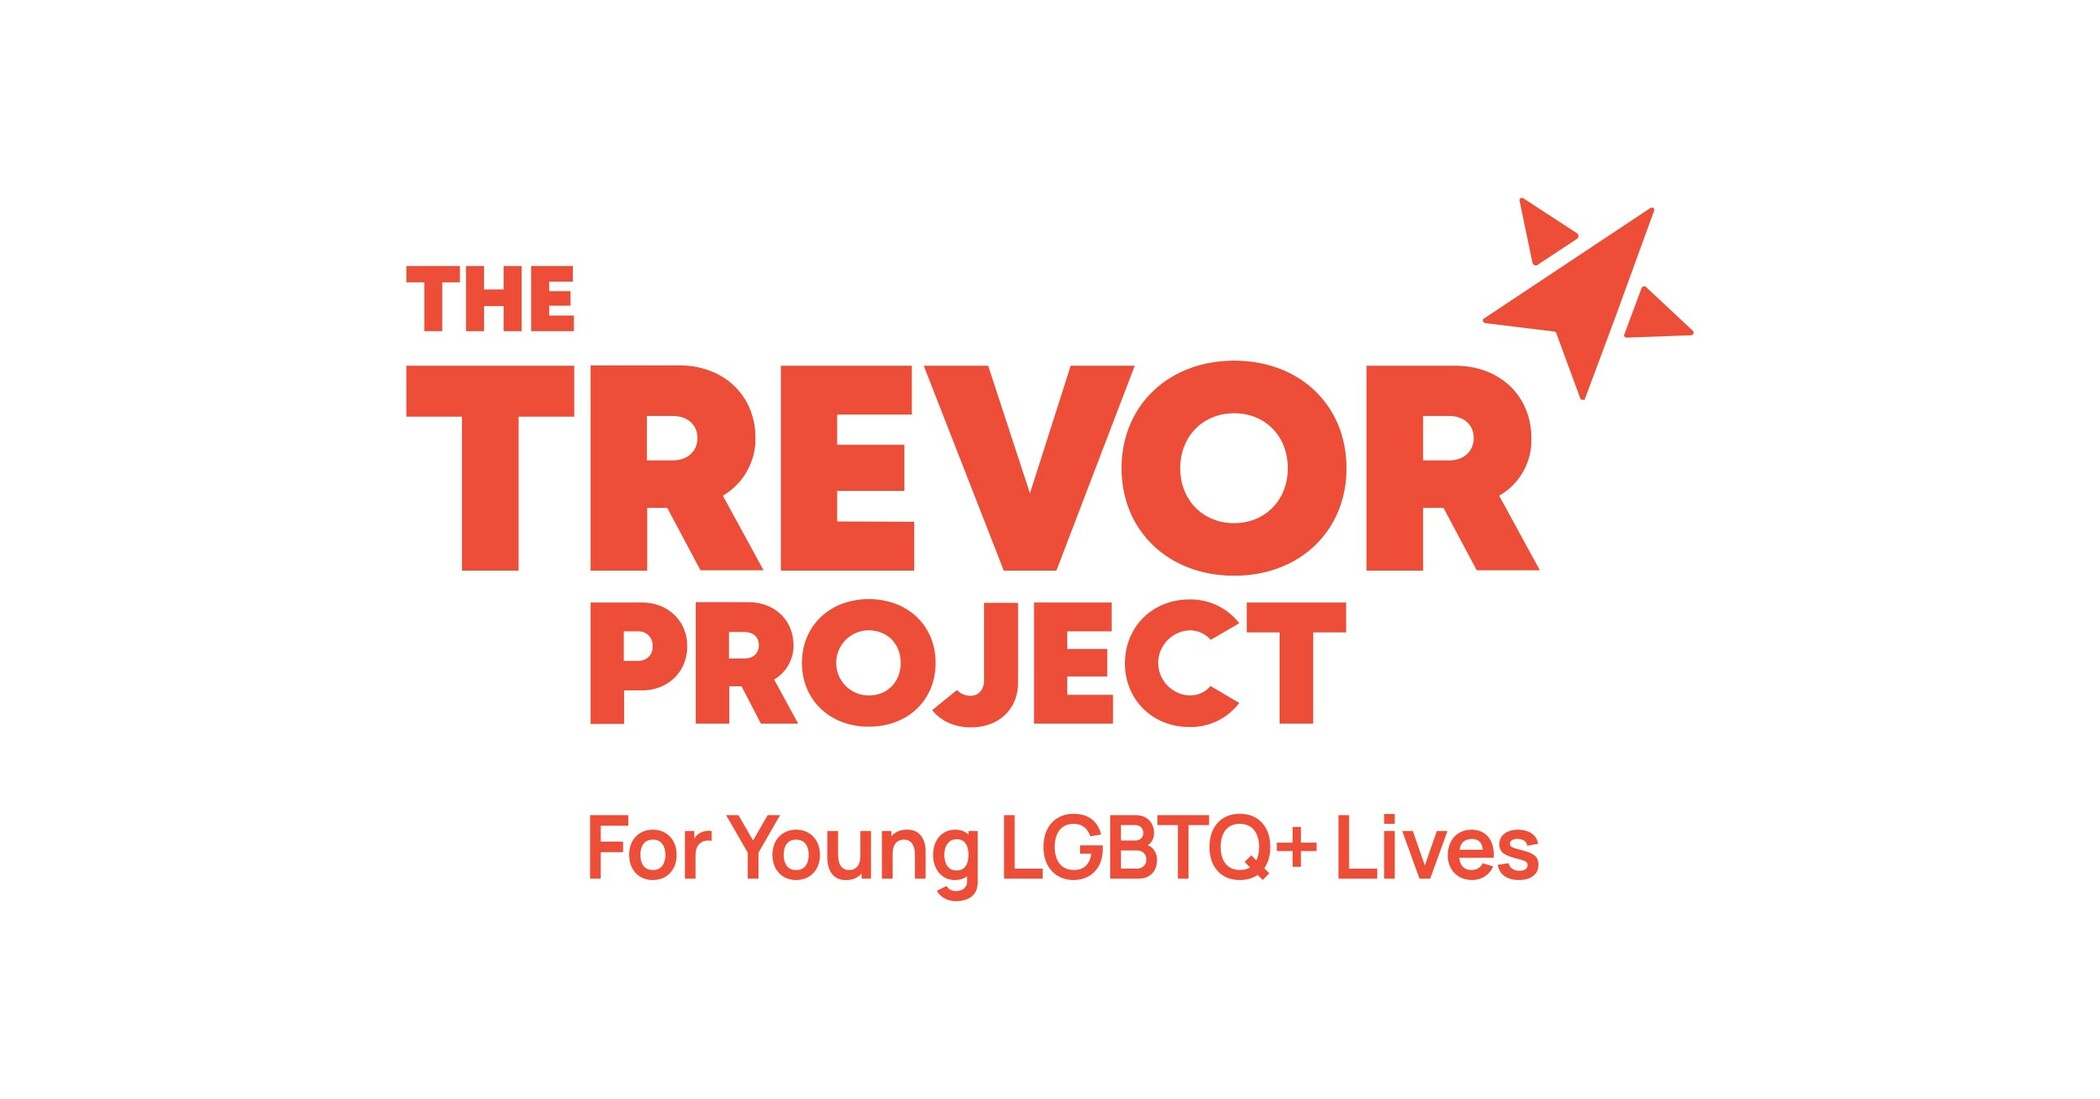 The Trevor Project Announces Plans to Launch Its Life-Saving Crisis  Services for LGBTQ Youth in Mexico